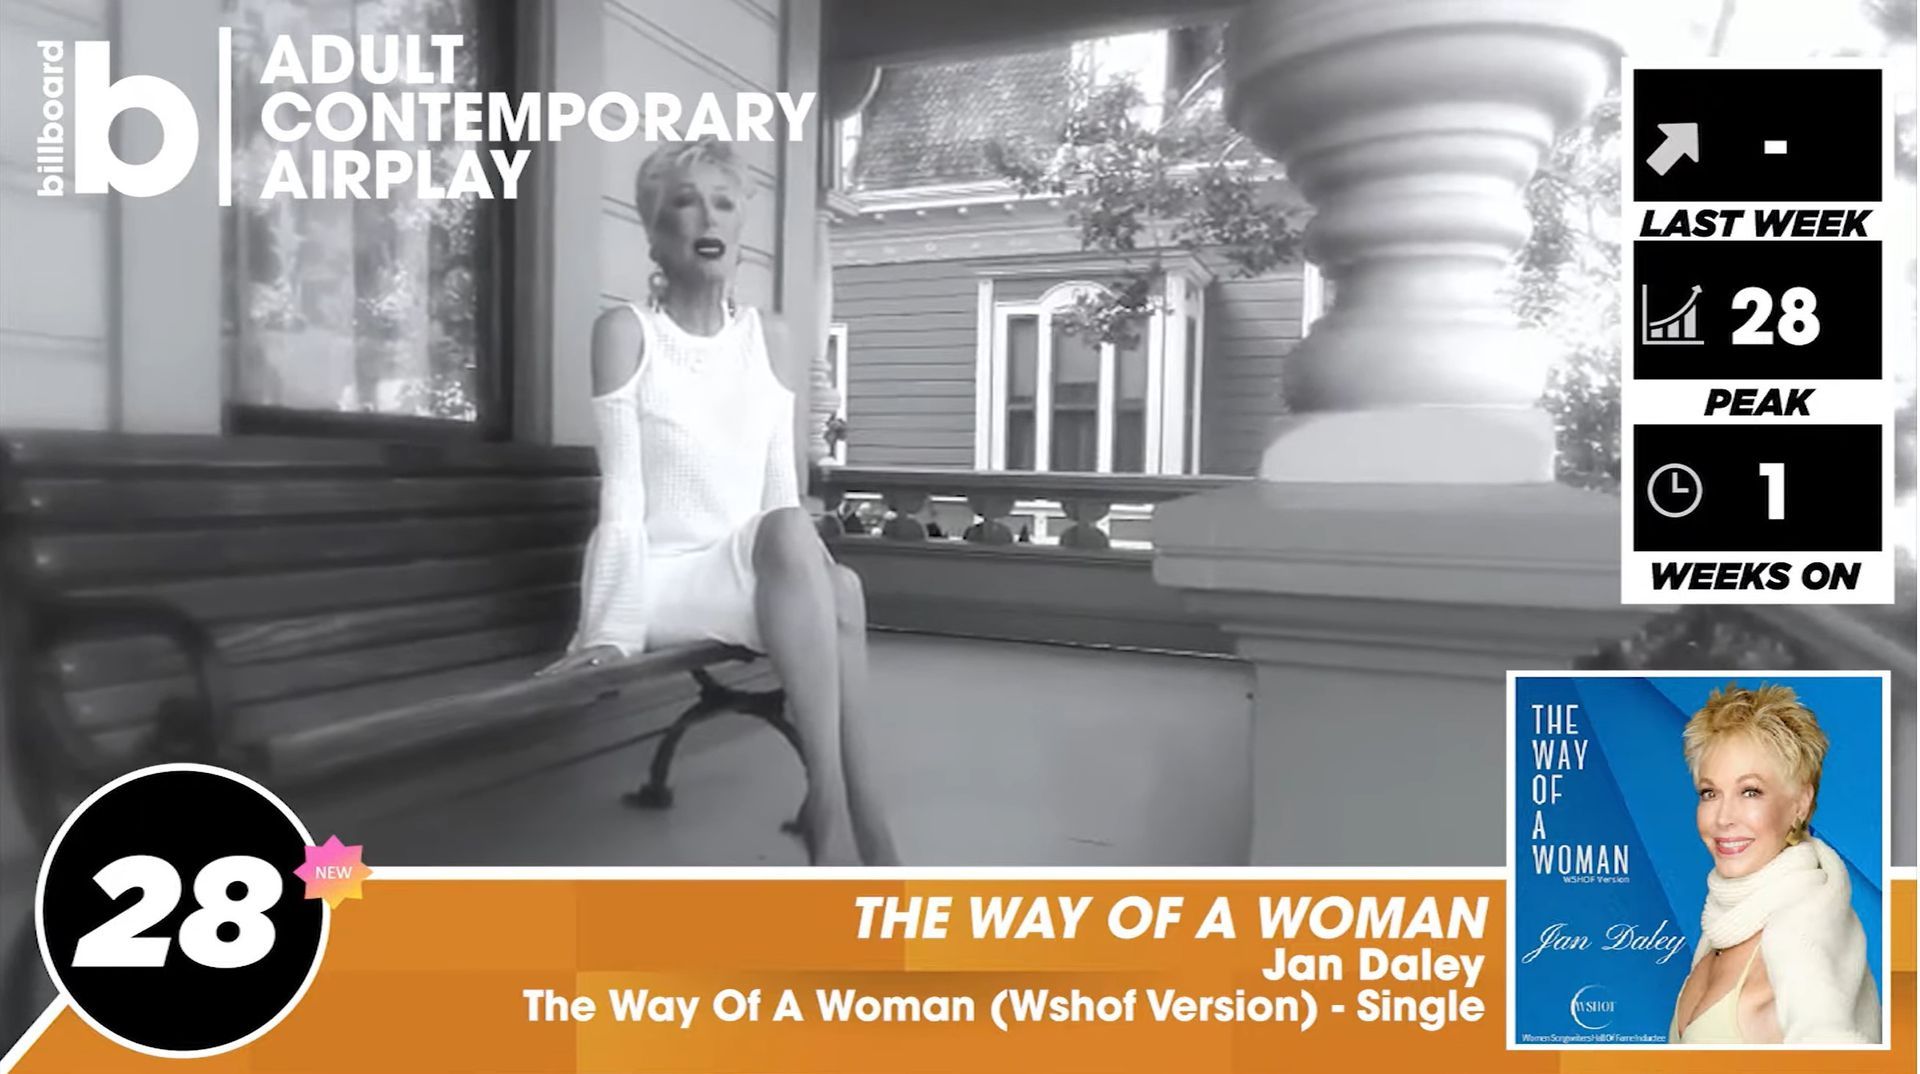 An ad for adult contemporary airplay shows a woman sitting on a bench